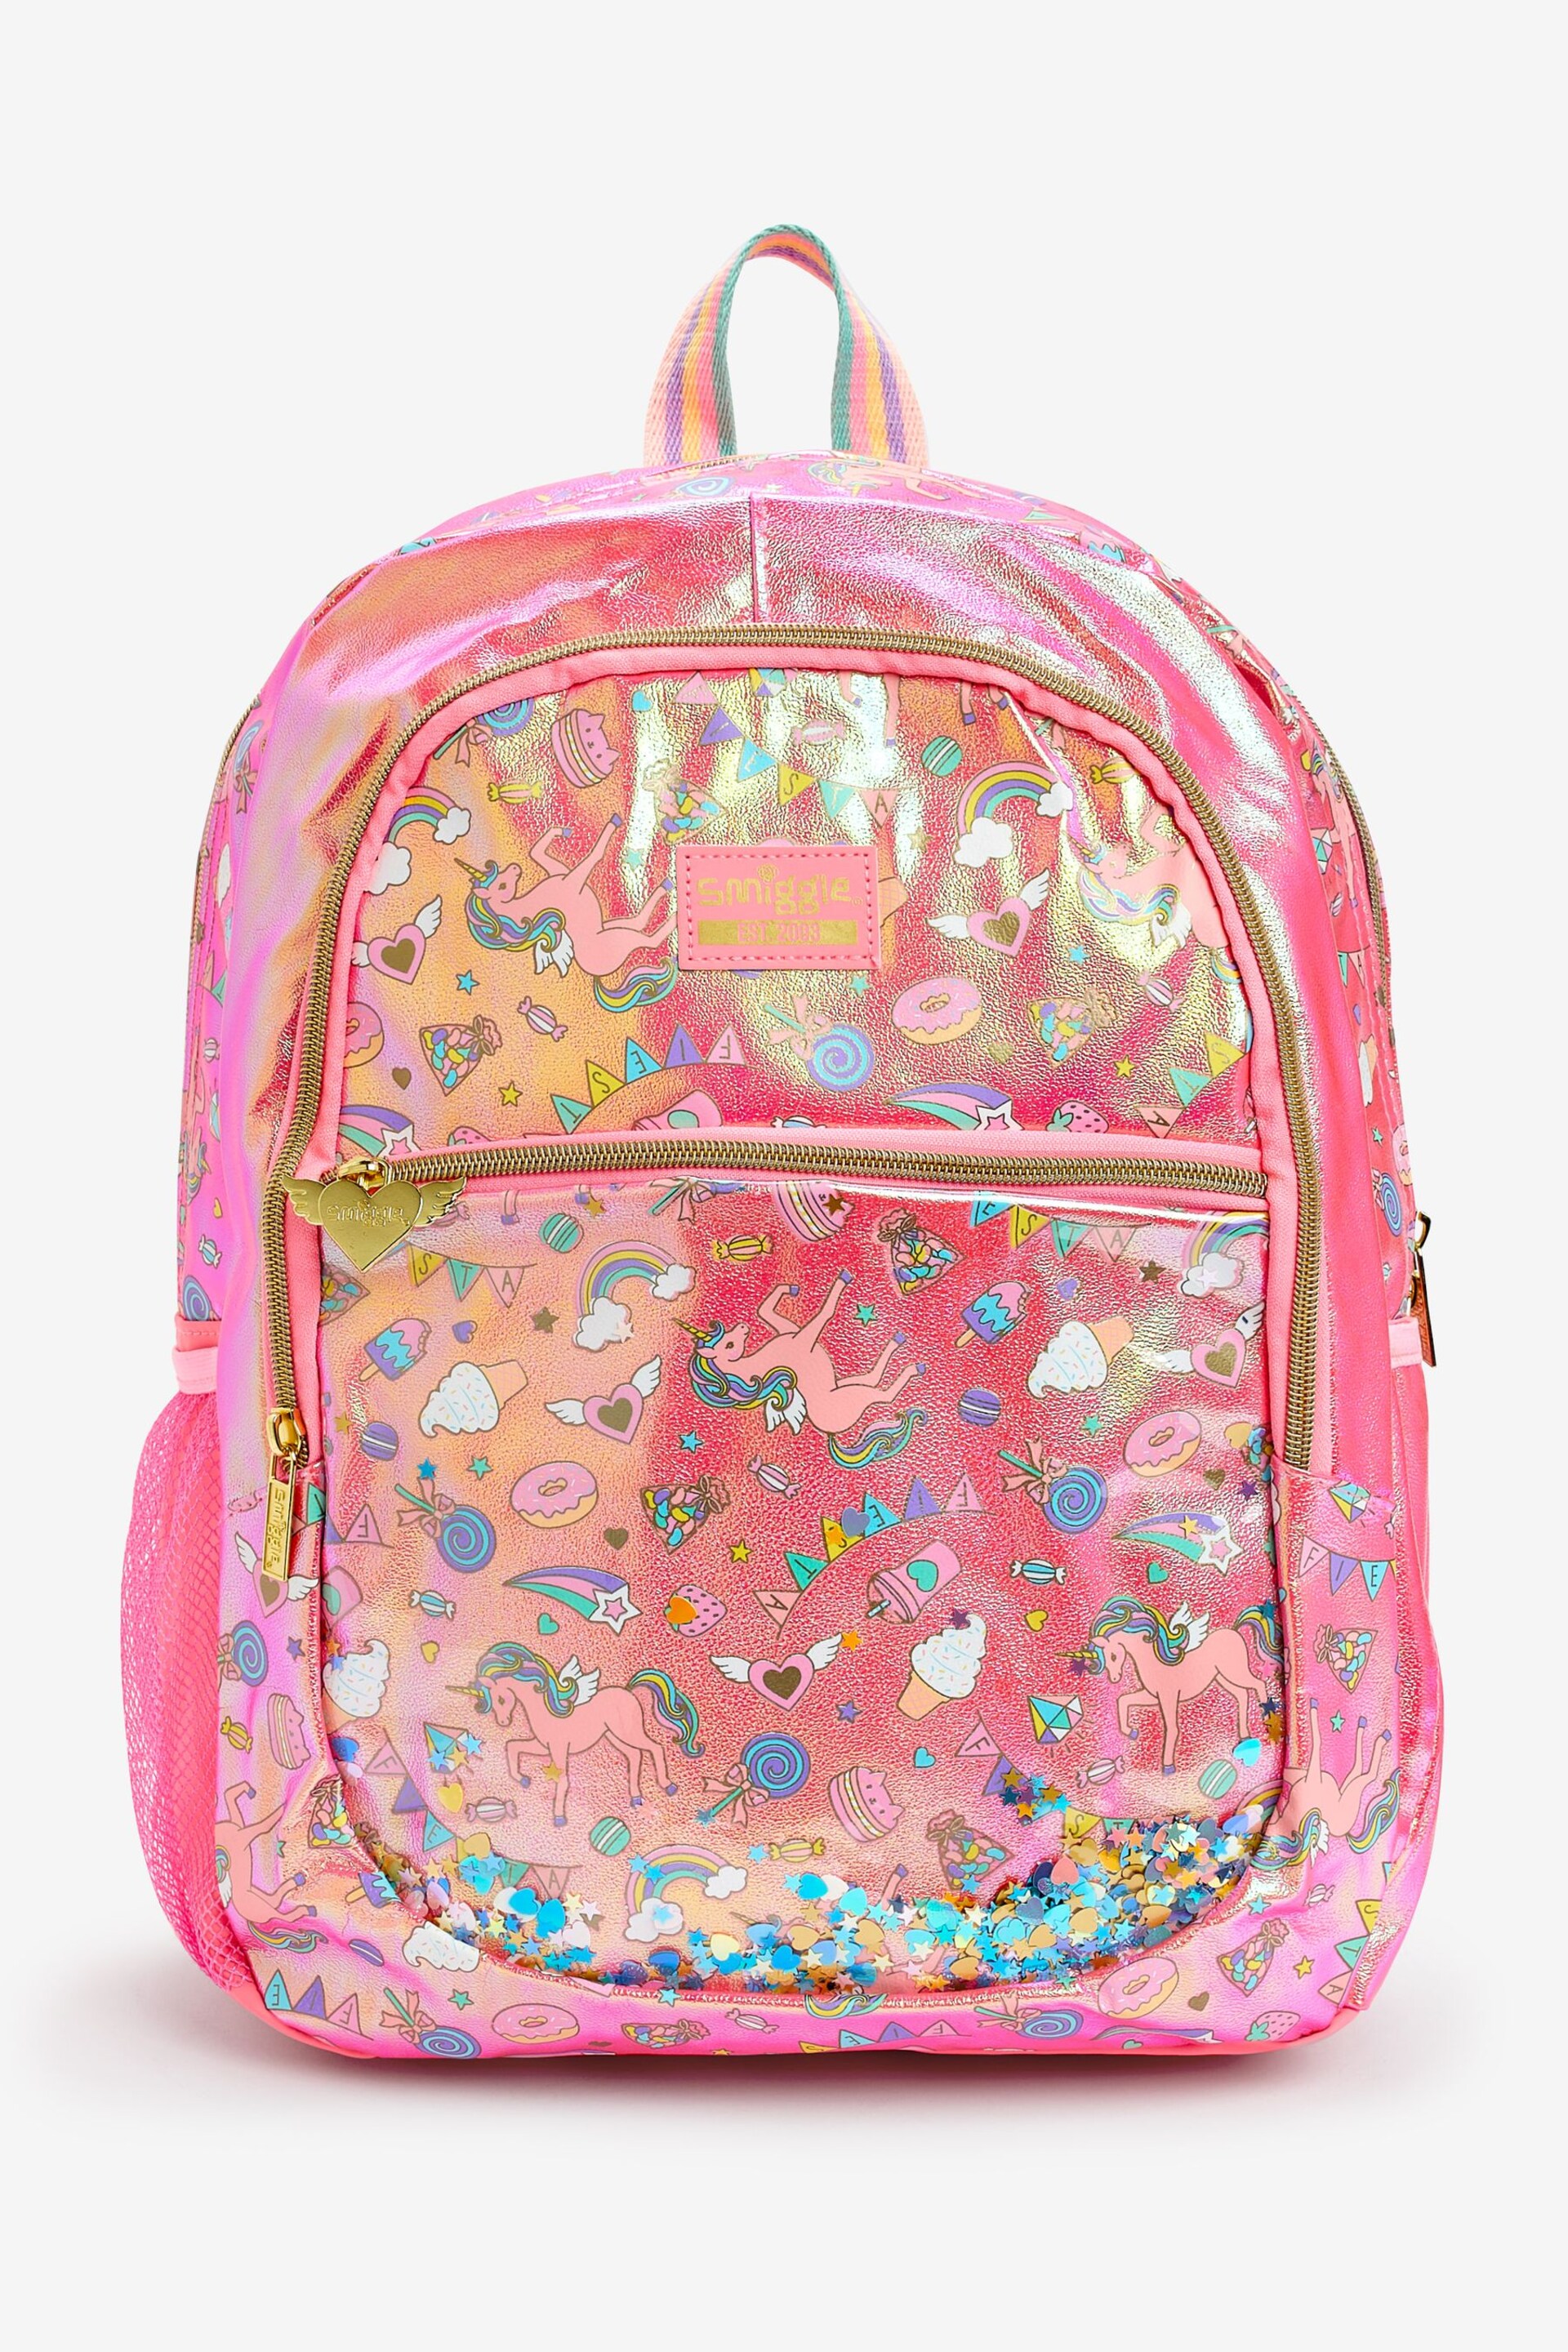 Smiggle Pink Fiesta Classic Backpack - Image 3 of 3